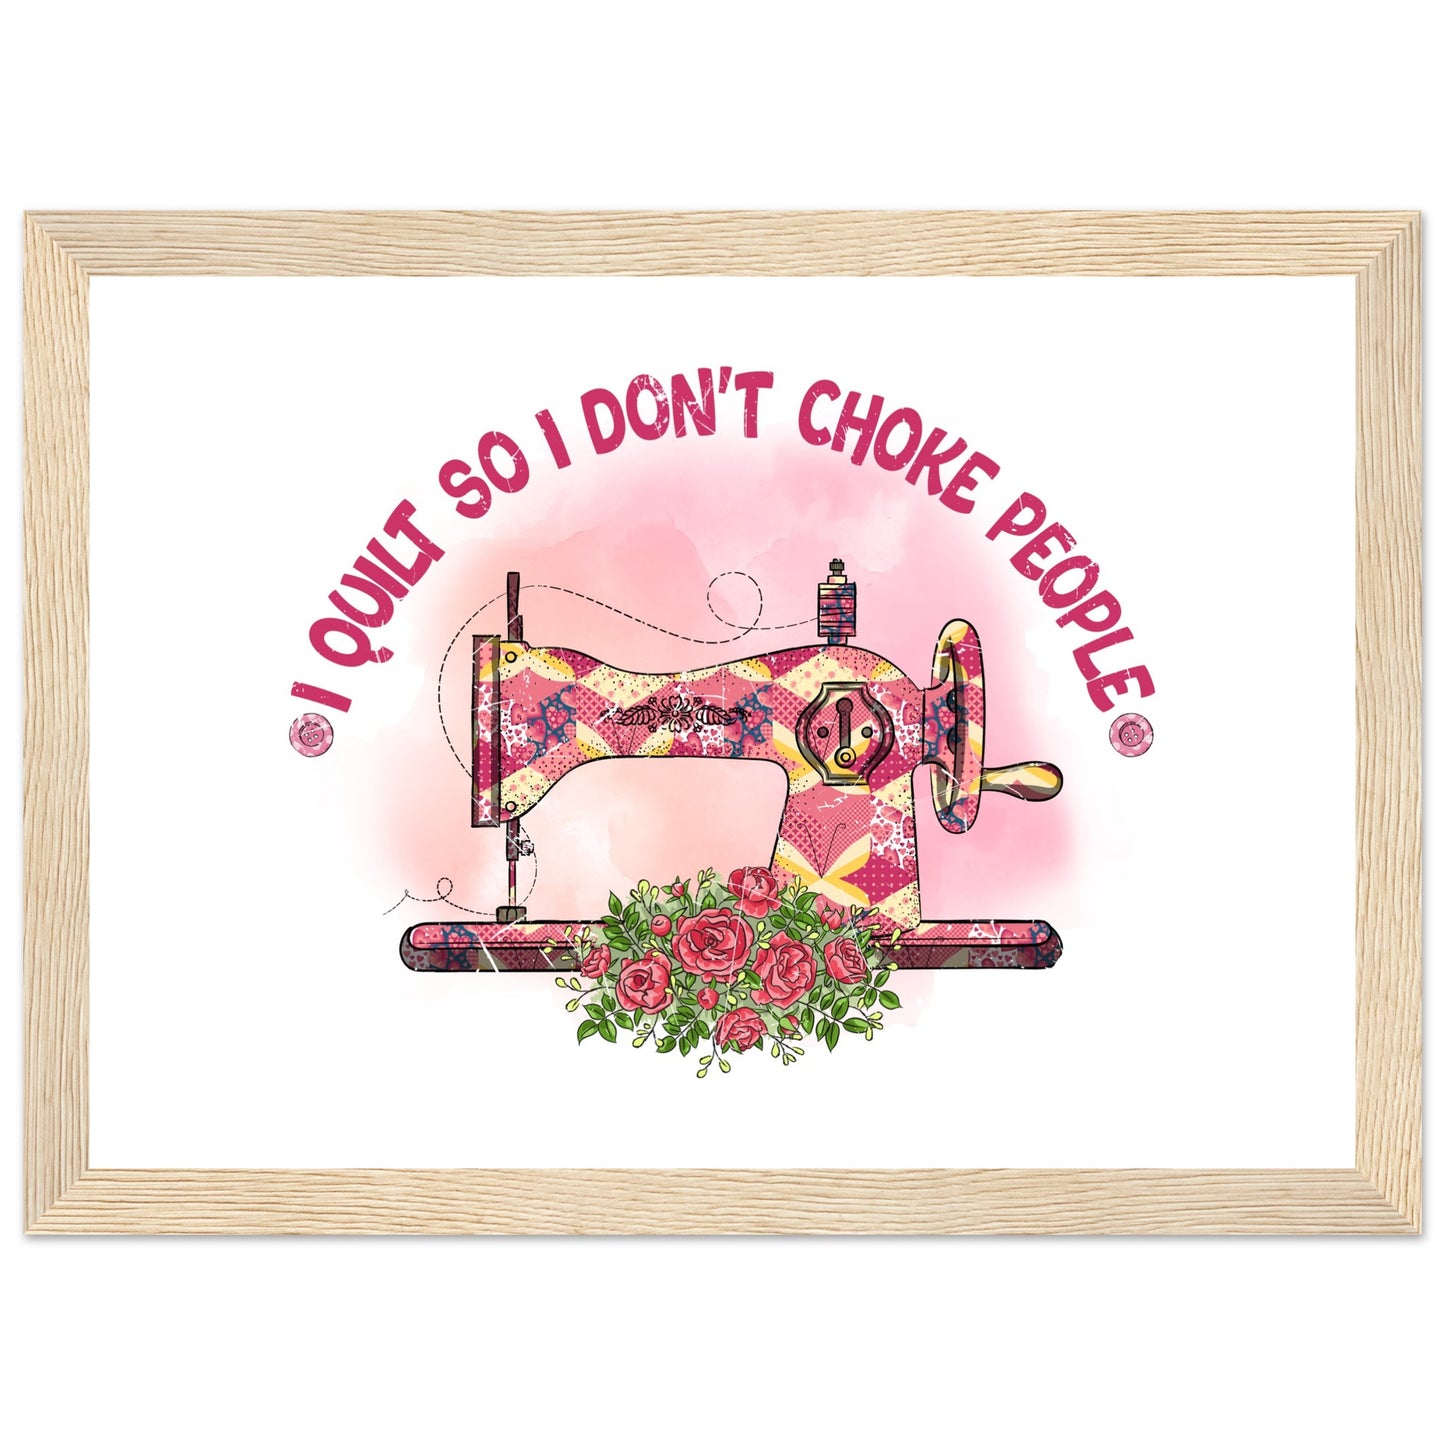 I Quilt So I Don't Choke People - Quilting Wall Art - Premium Matte Paper Wooden Framed Poster